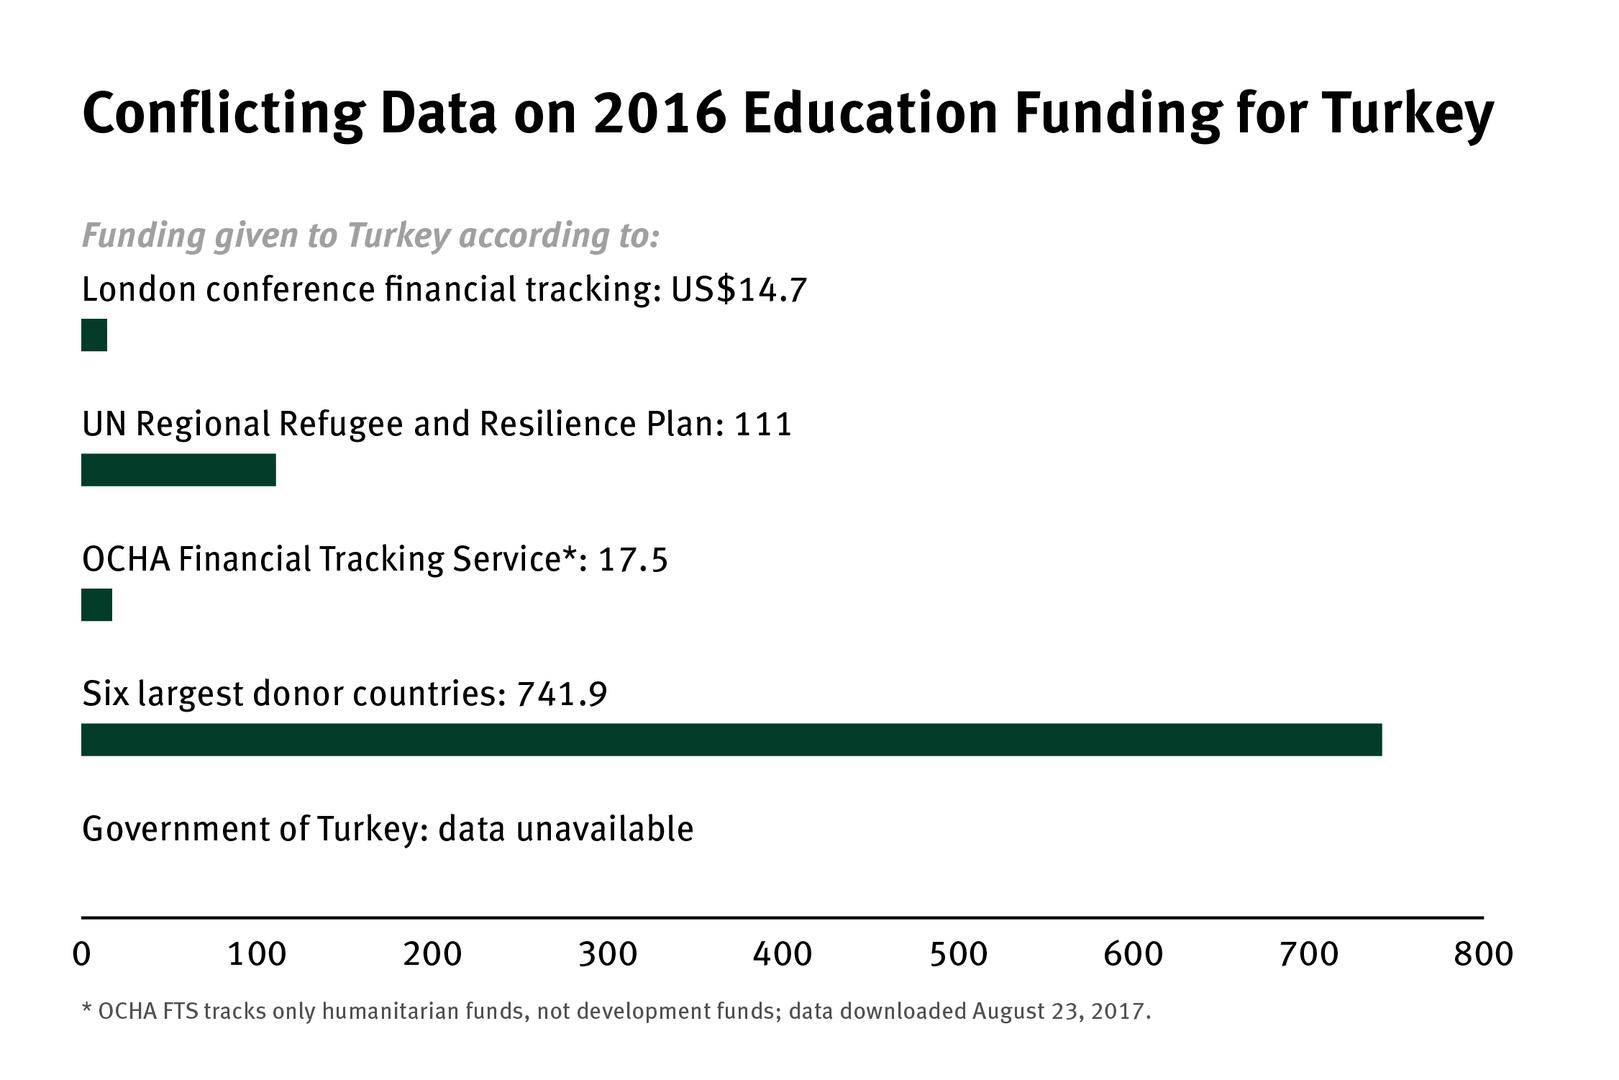 Conflicting data on 2016 education funding for Turkey